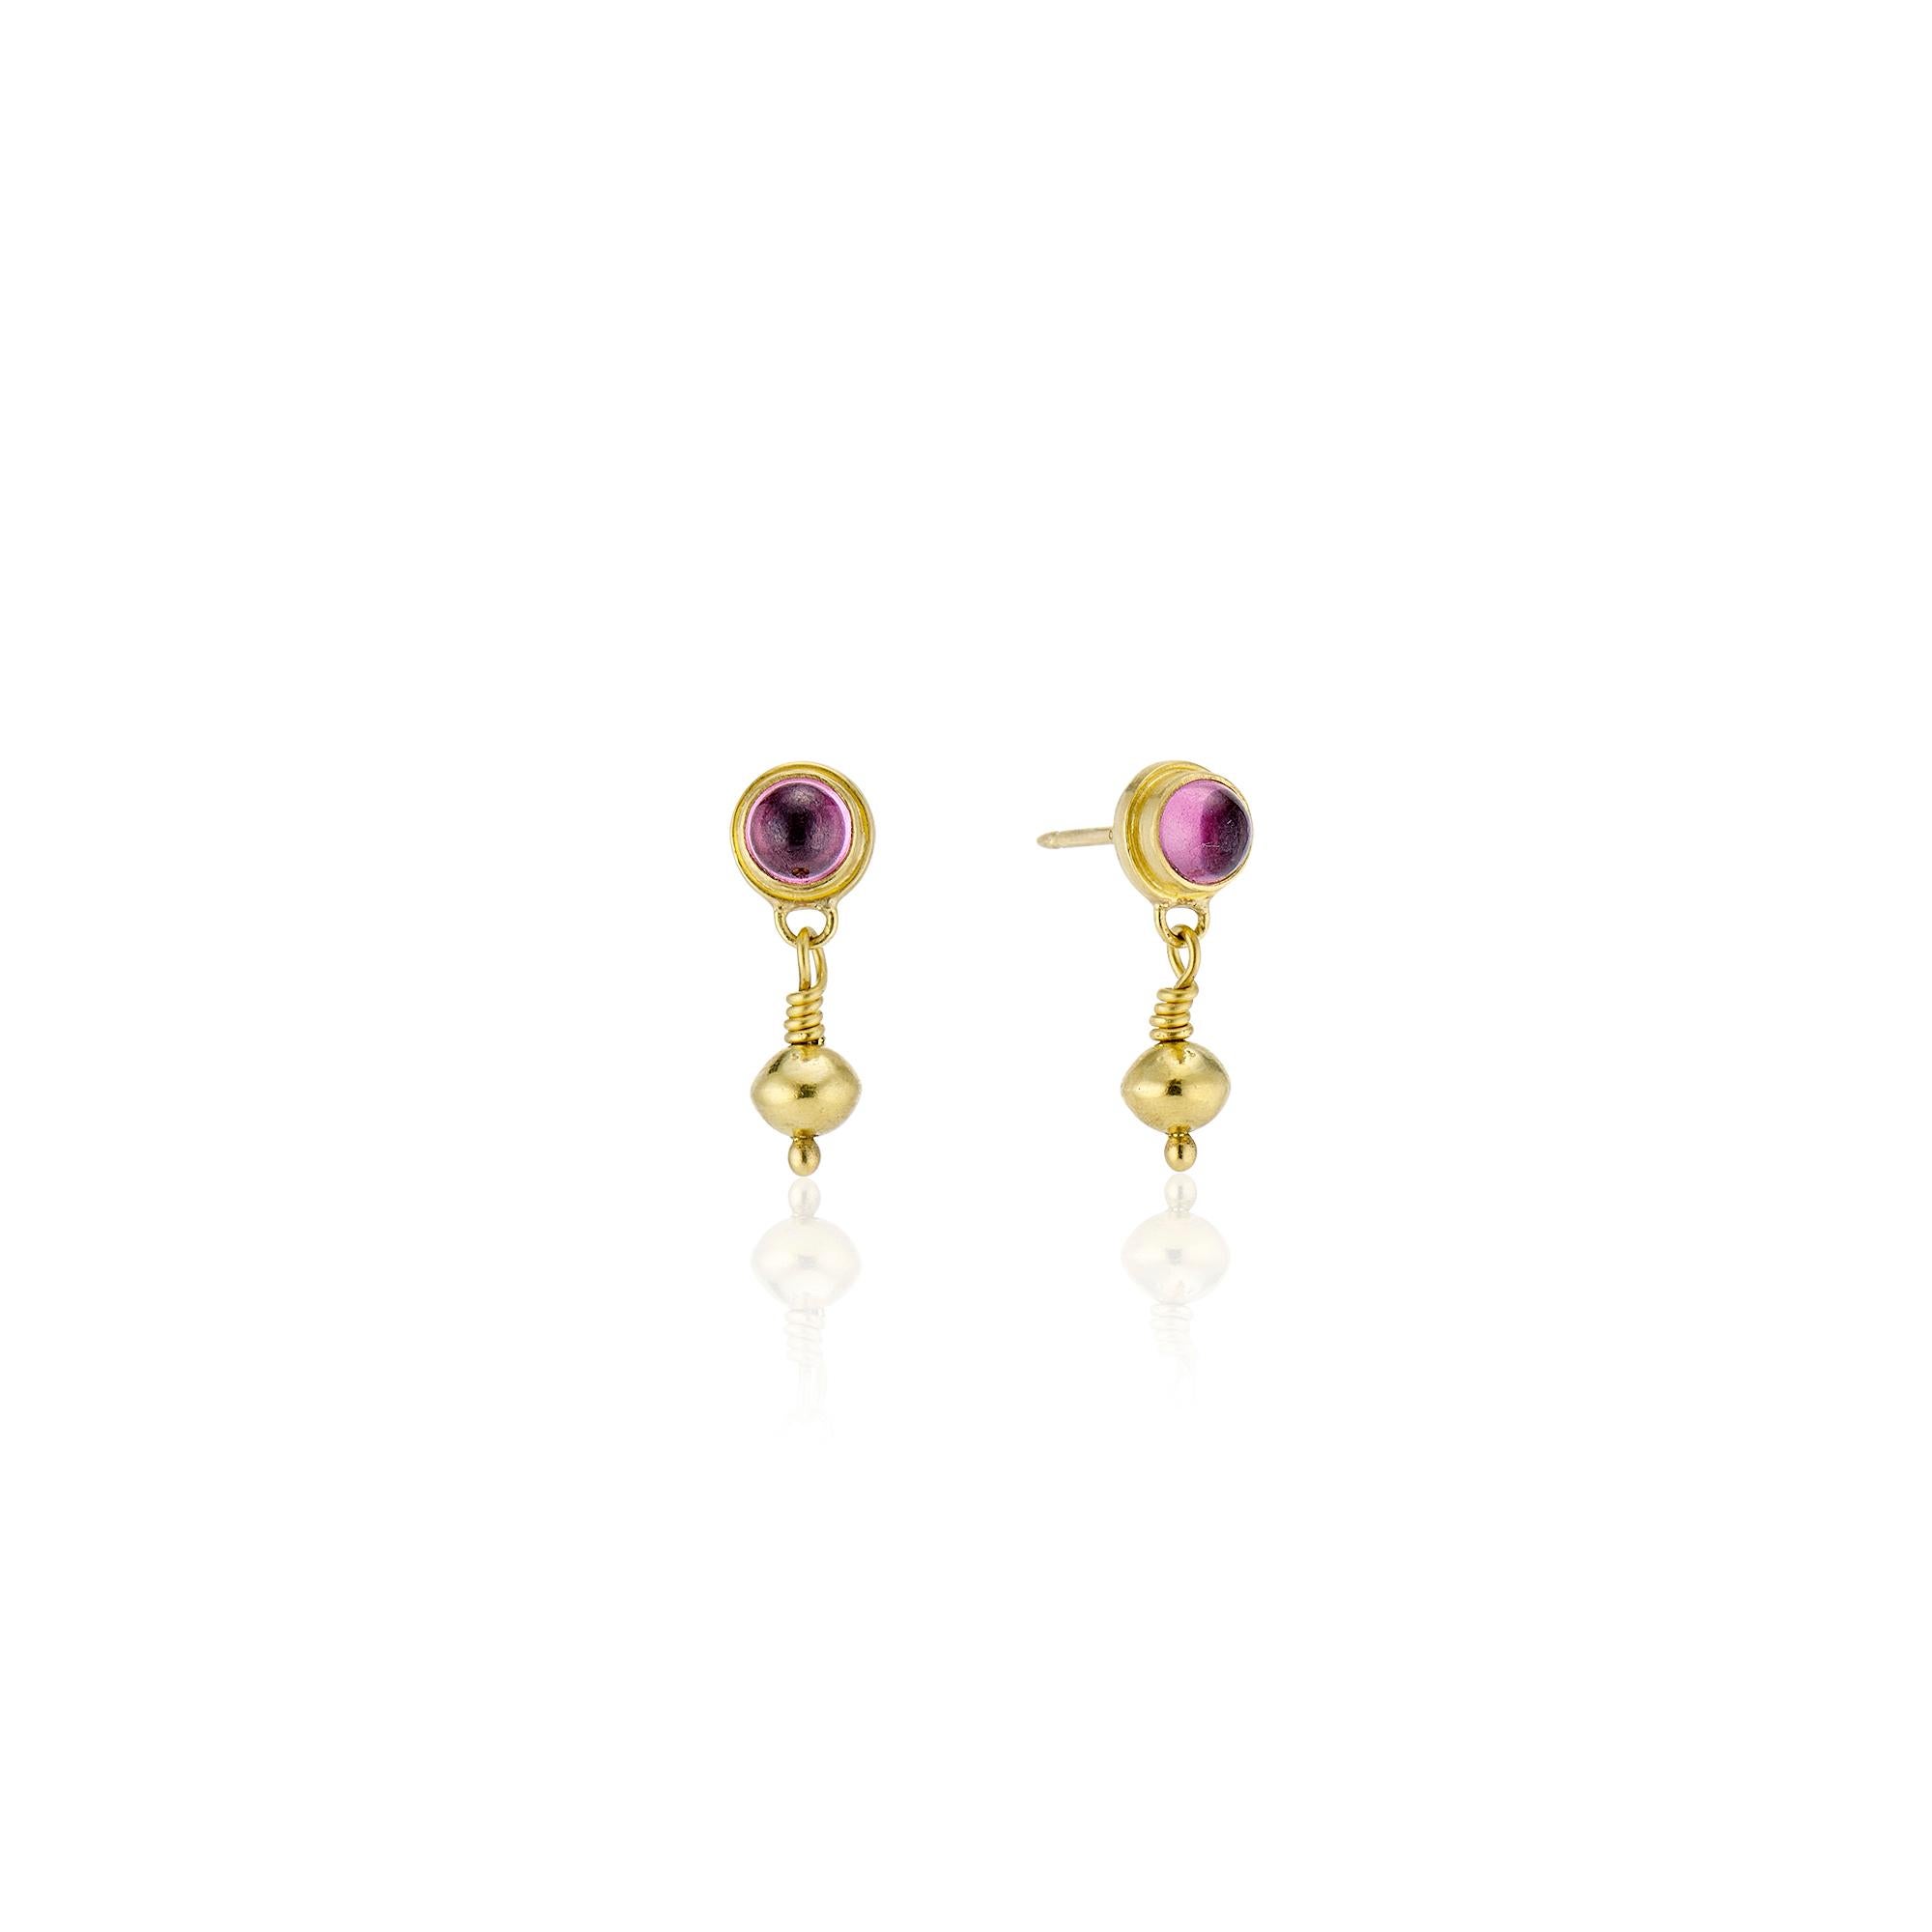 Contemporary 1.2 Carat Pink Tourmaline Cabochons, Gold Round Orb Beads Dangle Drop Earrings